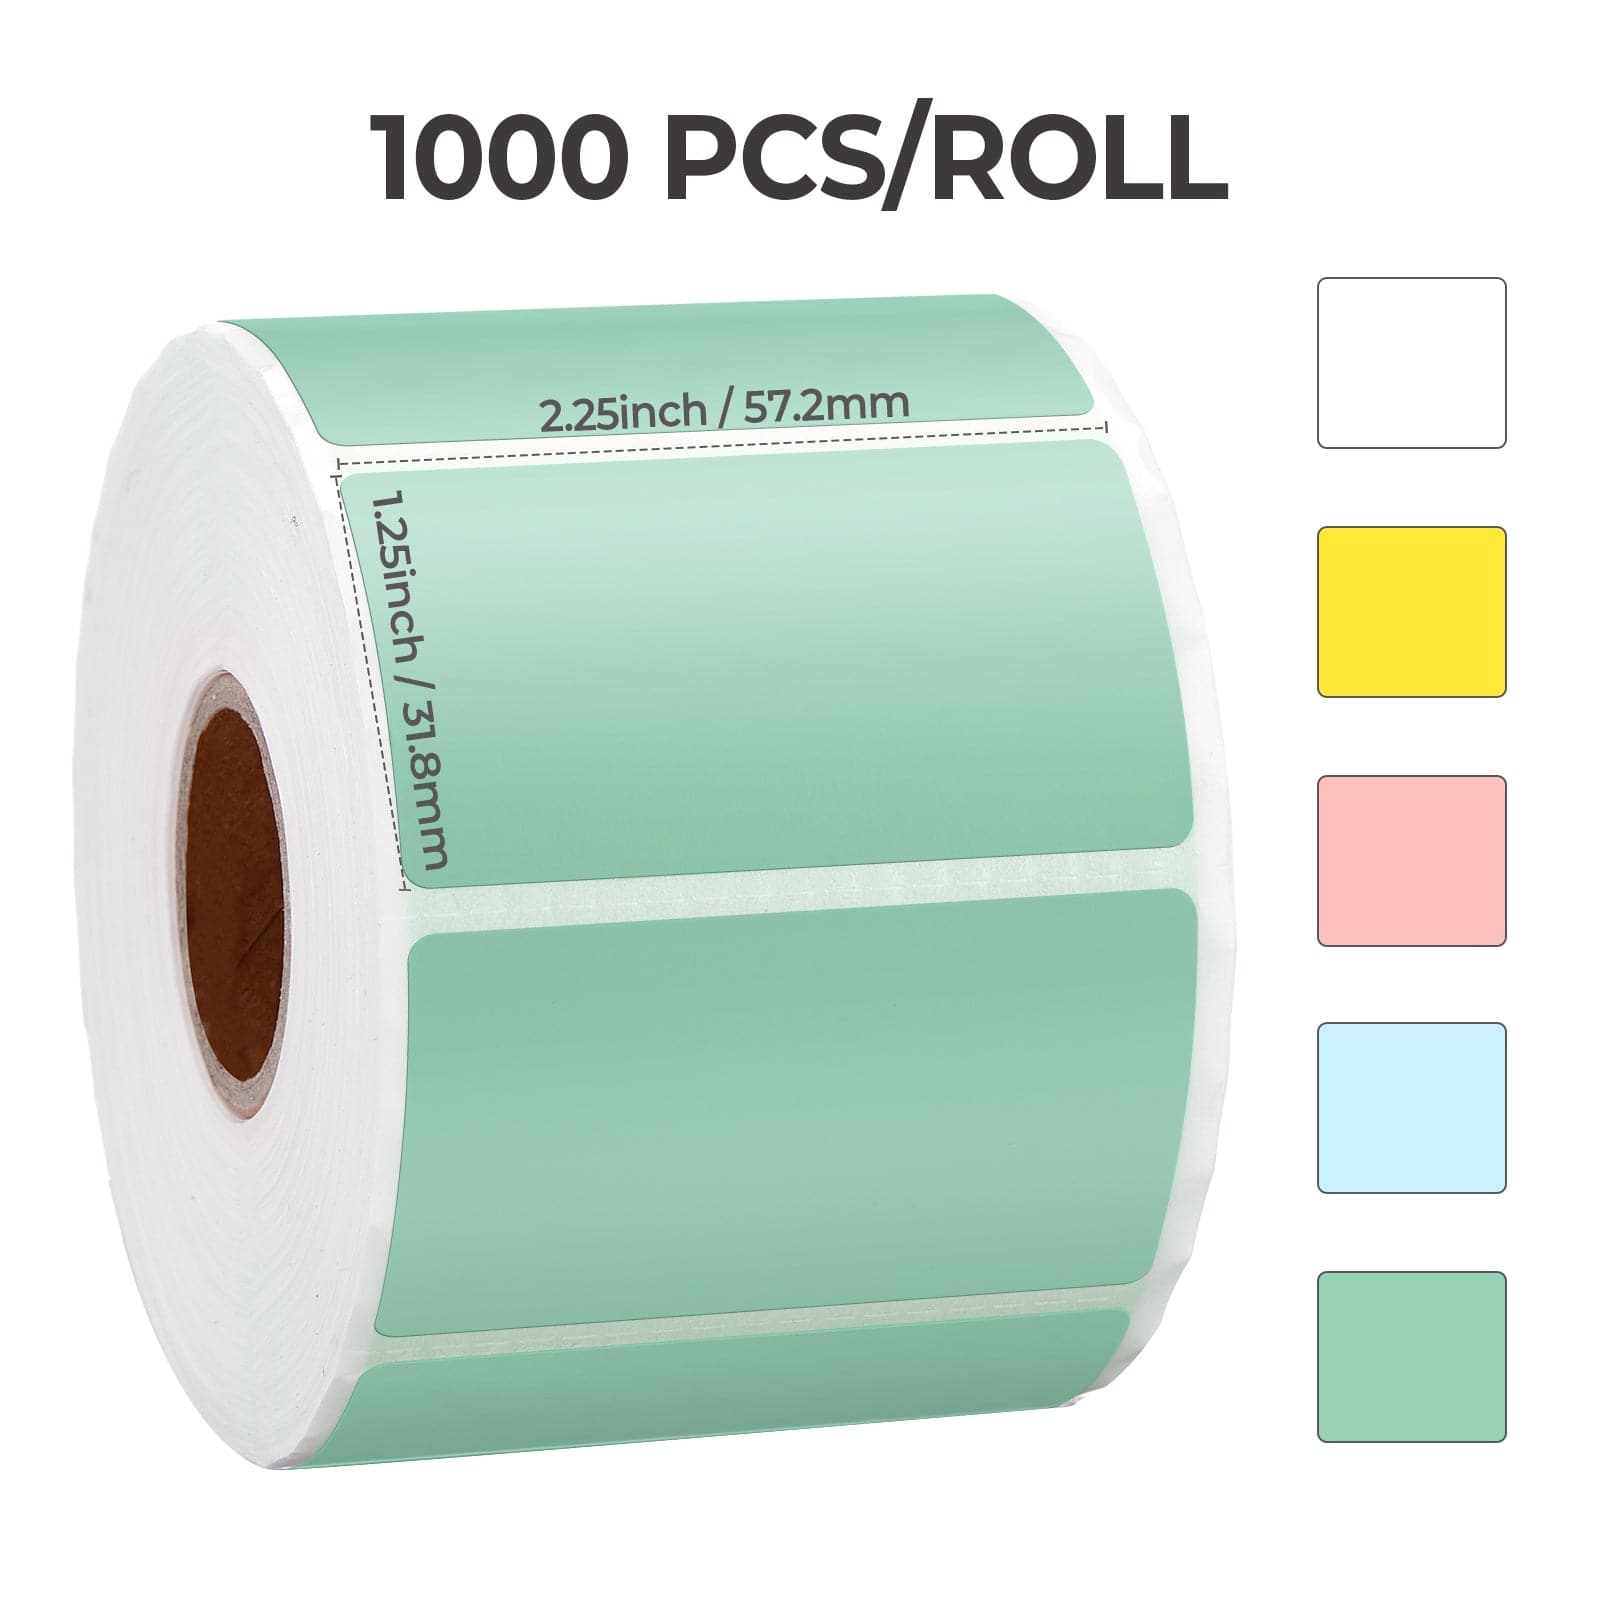 The 2.25"x1.25" rectangle labels are available in five colors with 1000 labels per roll.